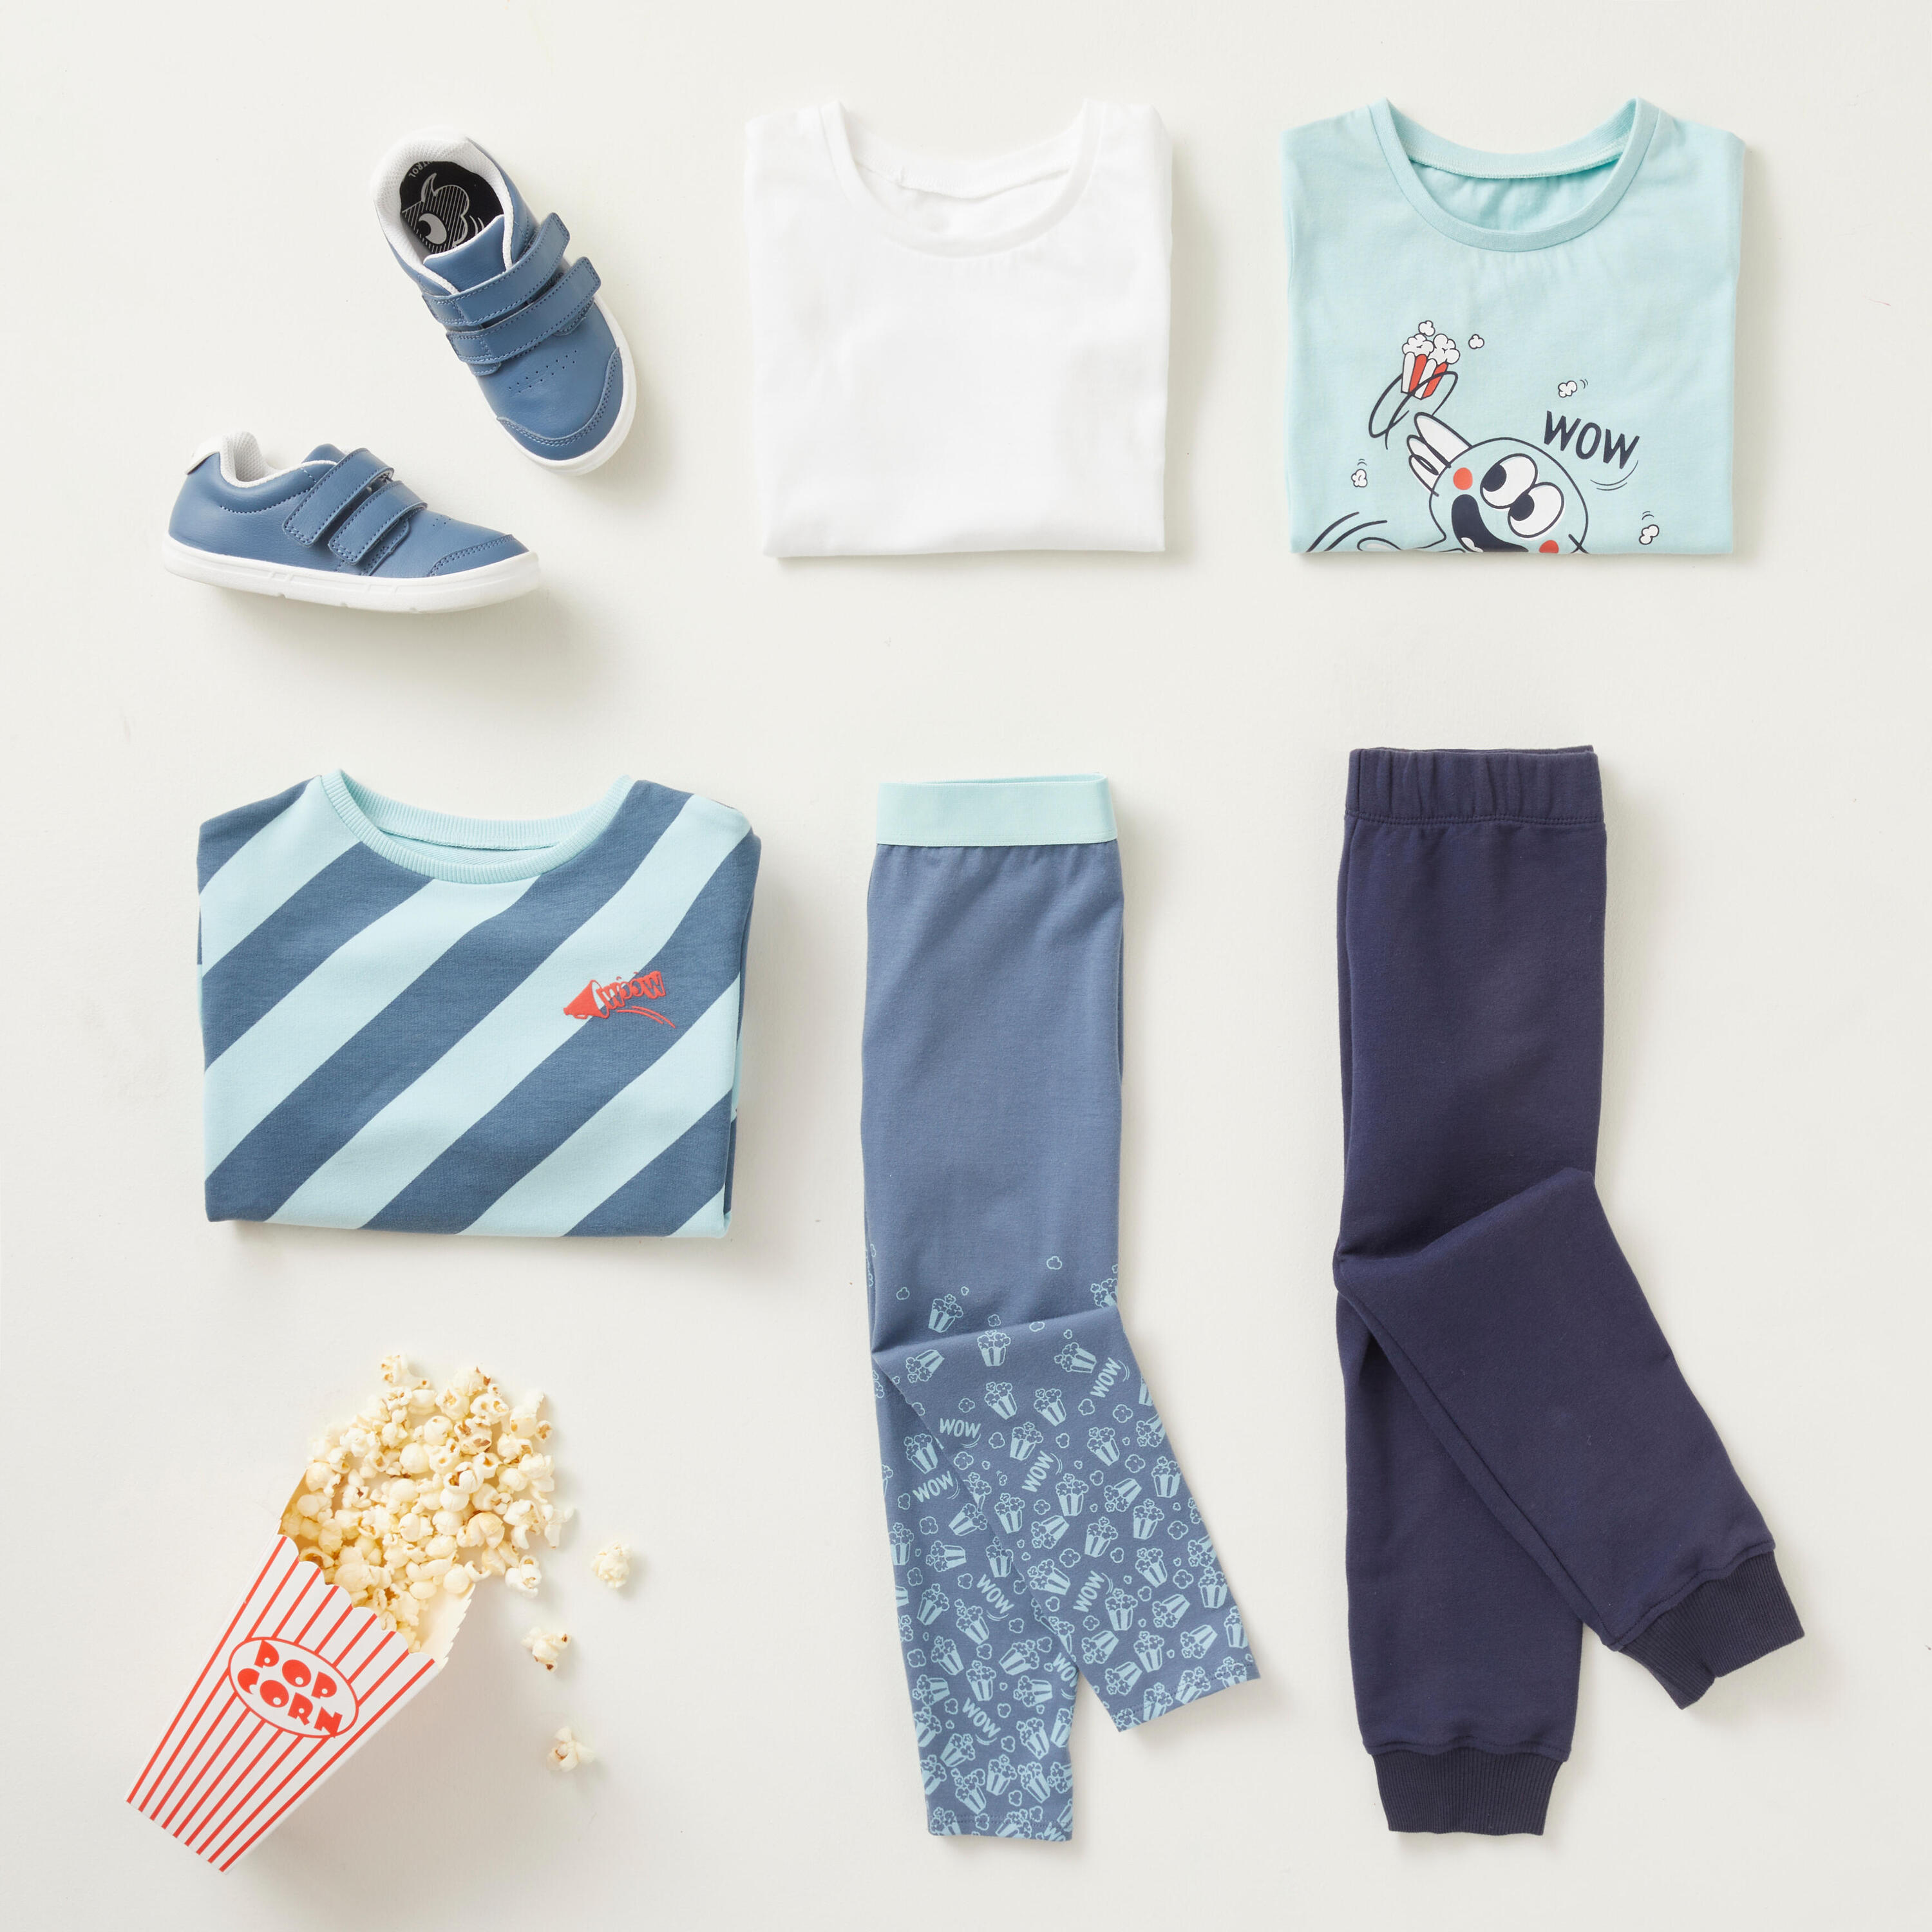 Kids' Cotton T-Shirt Basic - Turquoise with Print 2/10